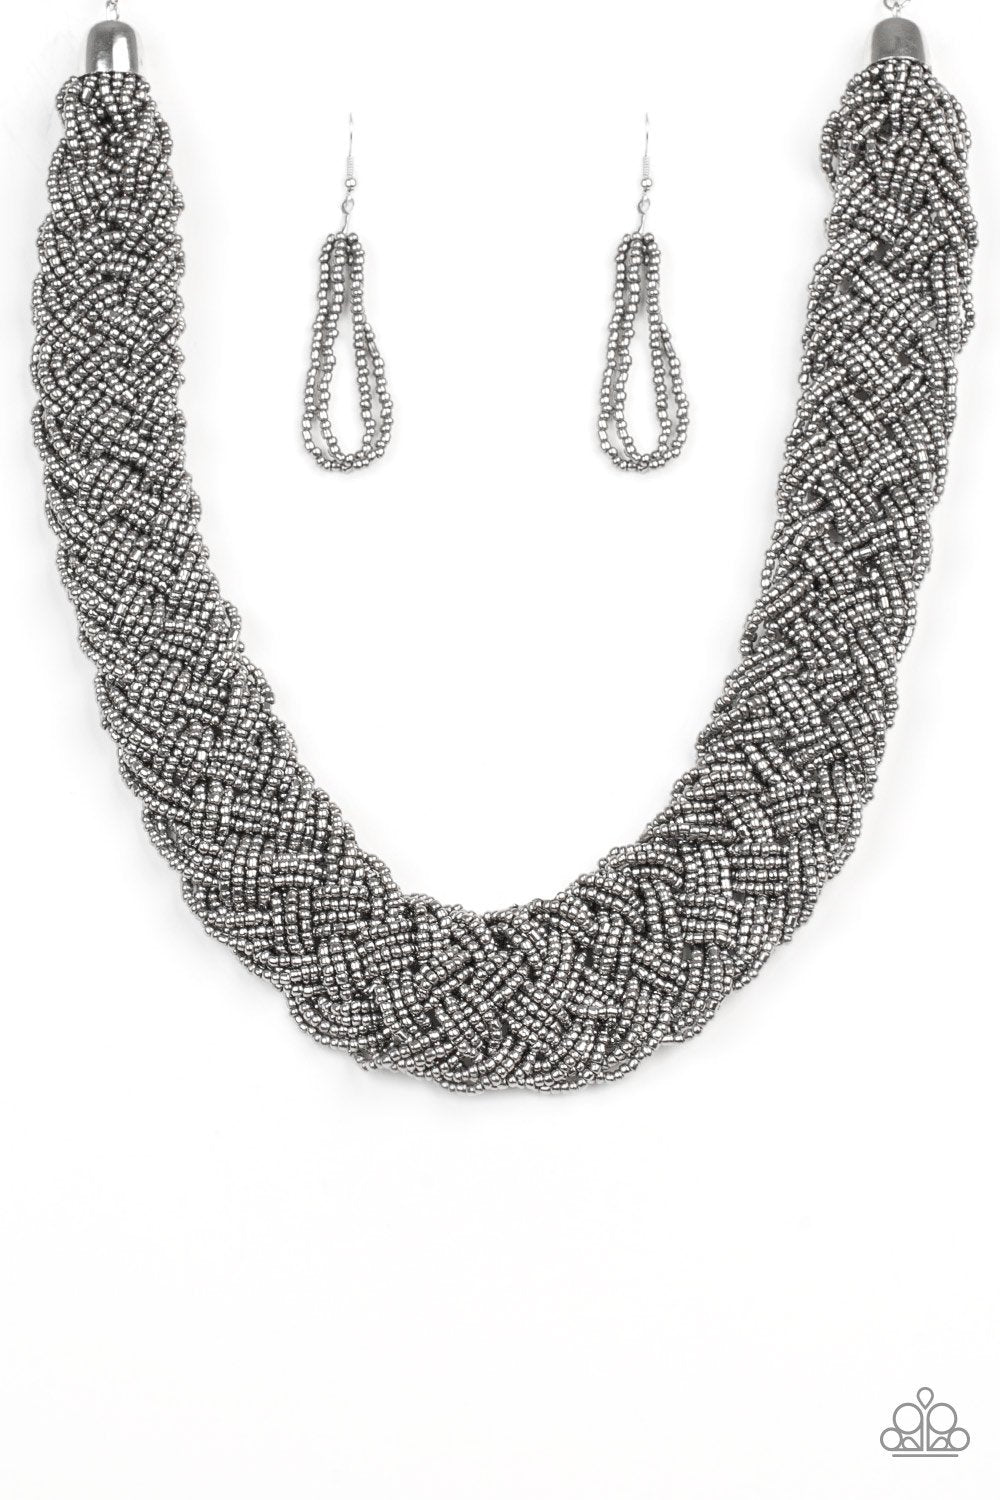 Mesmerizingly Mesopotamia Gunmetal Seed Bead Necklace and matching Earrings - Paparazzi Accessories-CarasShop.com - $5 Jewelry by Cara Jewels